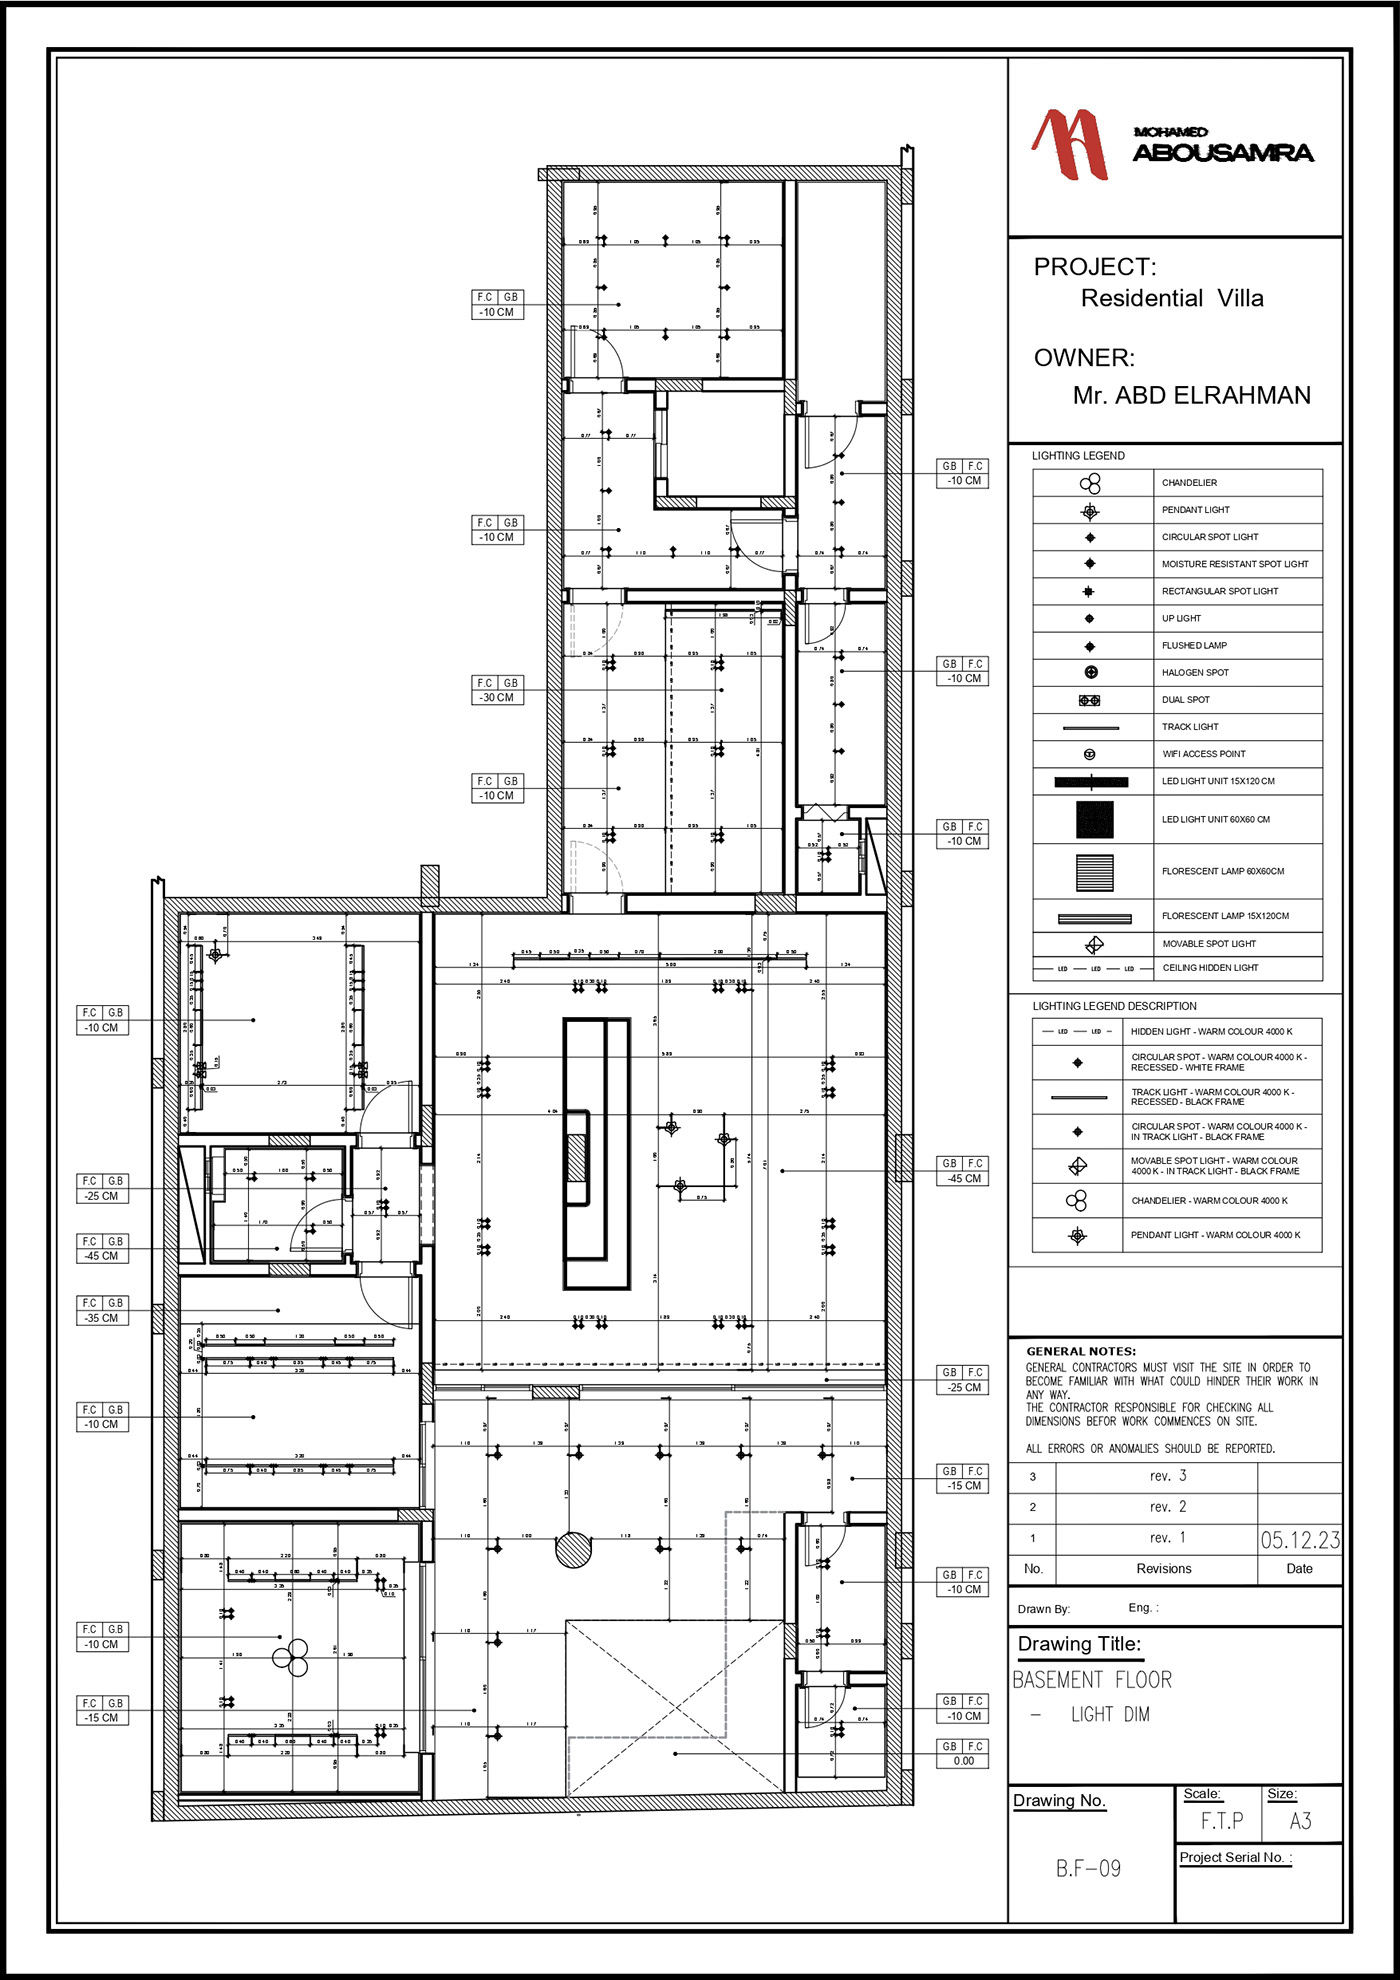 interior design  Interior architecture architectural design working drawings working shop drawing technical drawing details material